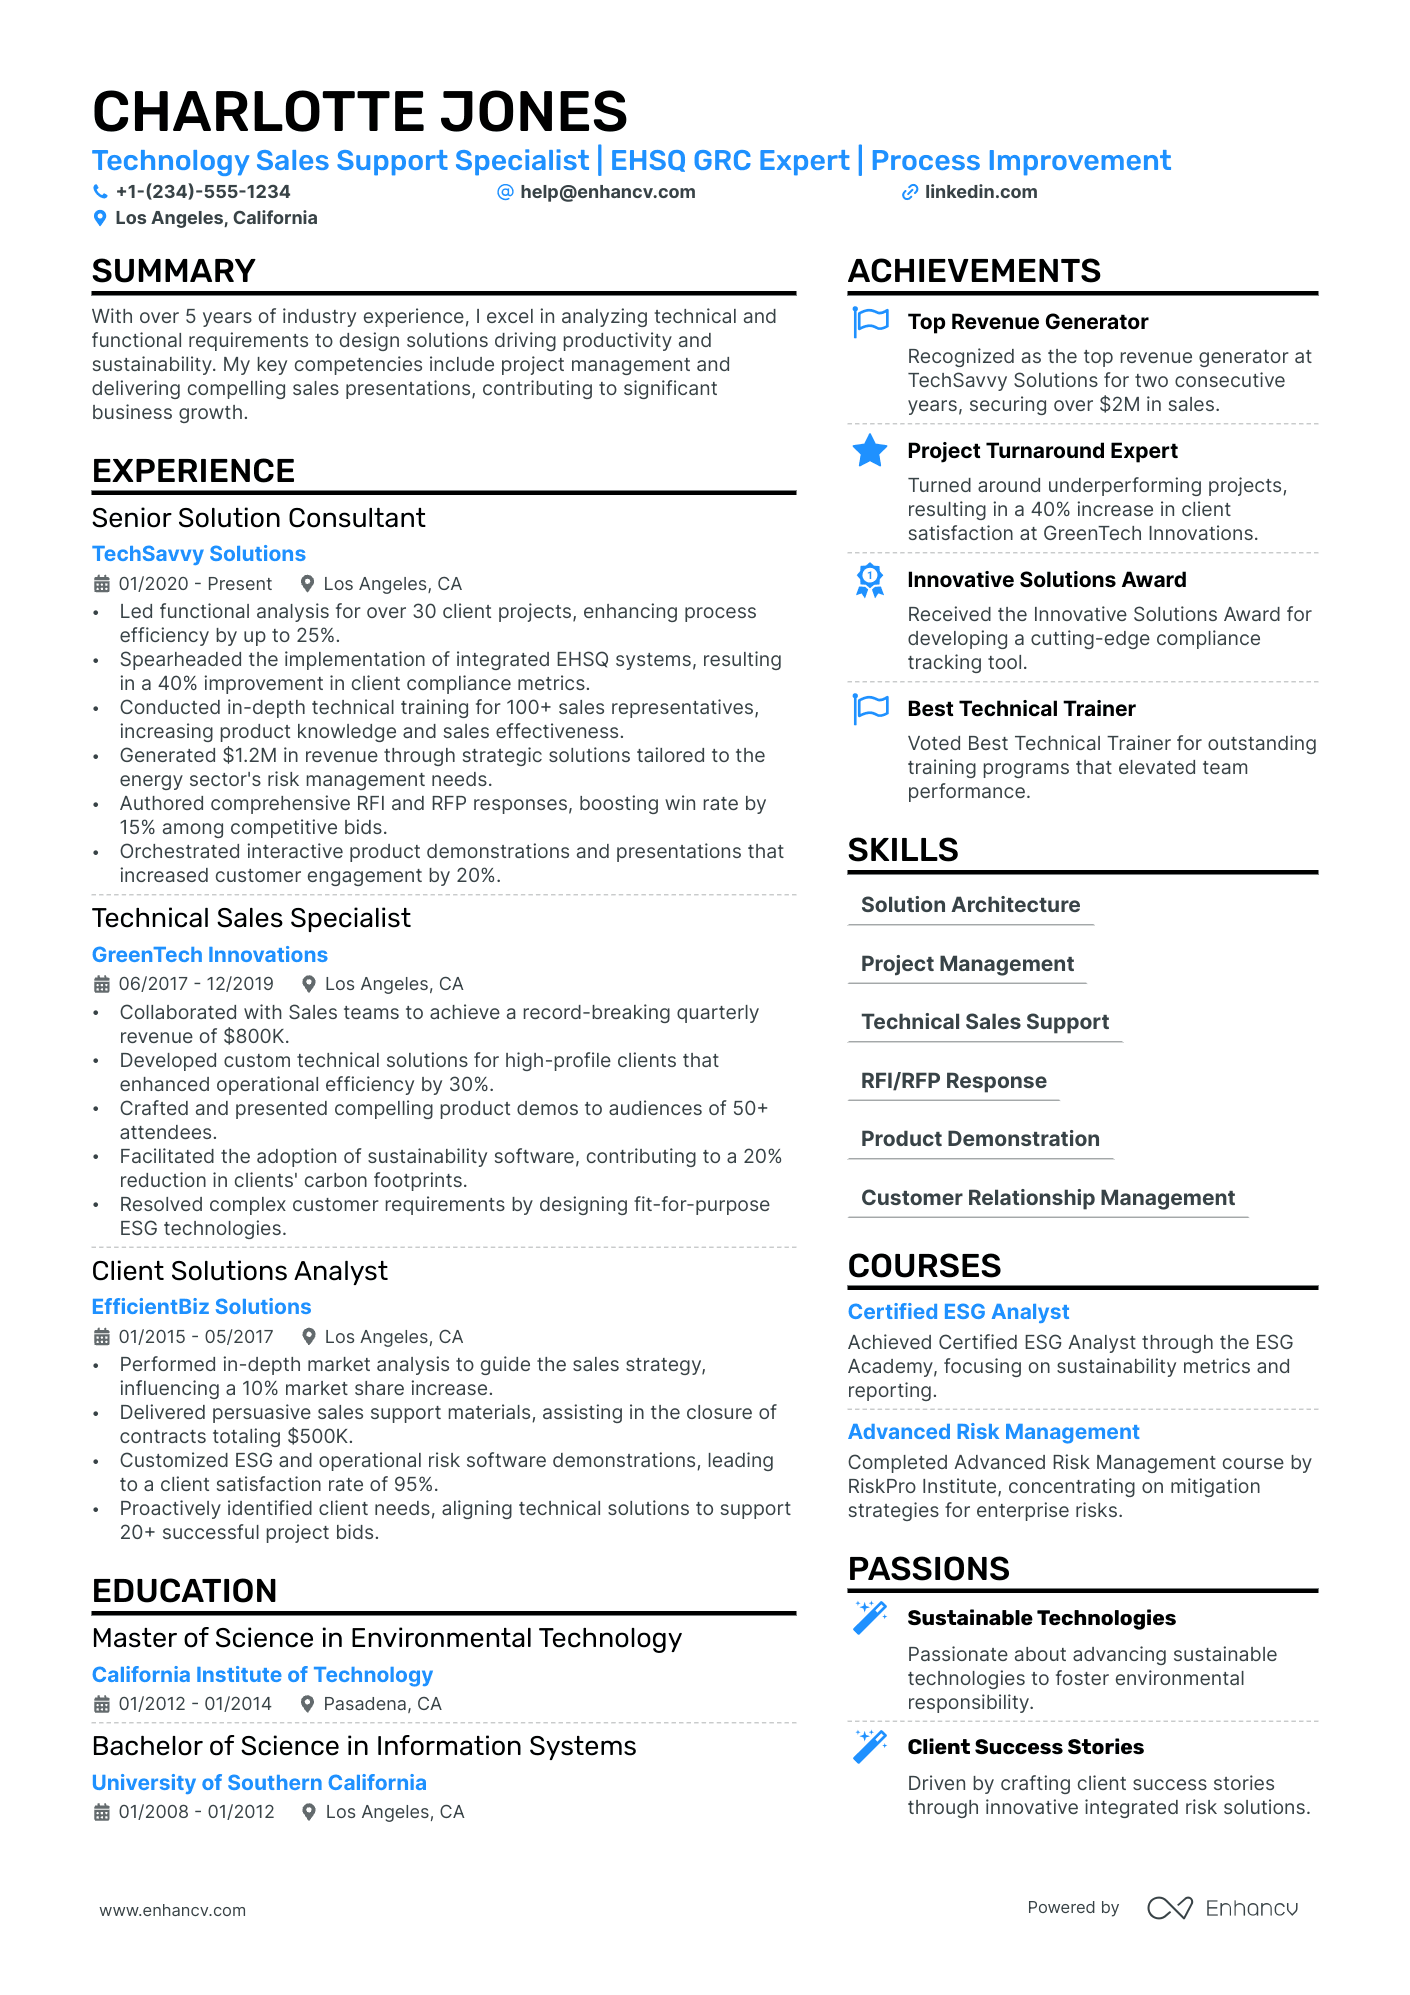 Sales Support Specialist resume example